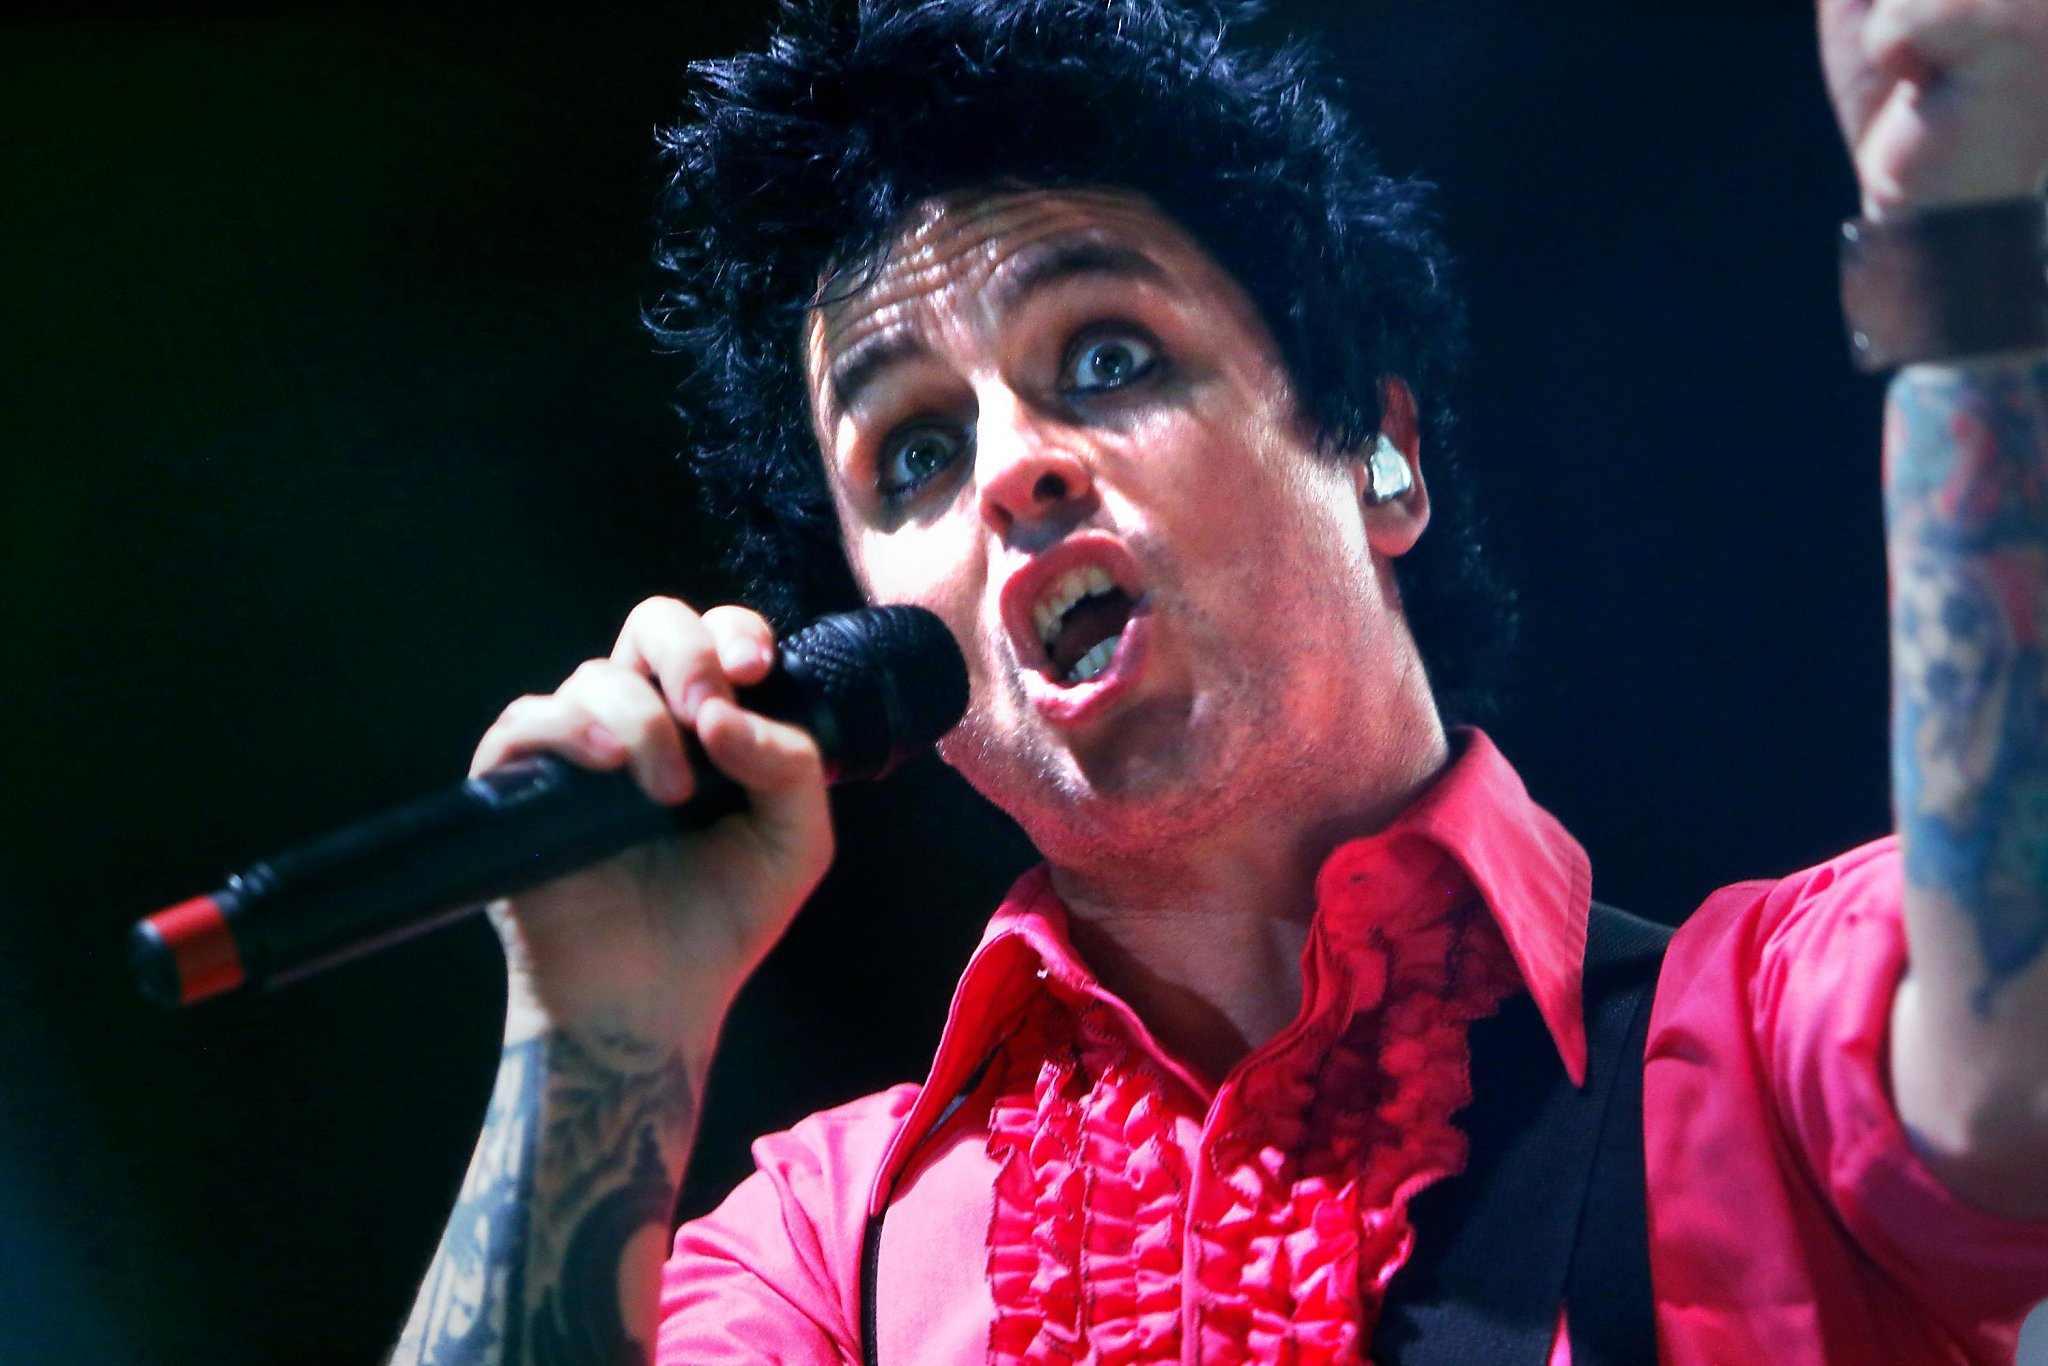 Green Day frontman Billie Joe Armstrong’s side project the ...